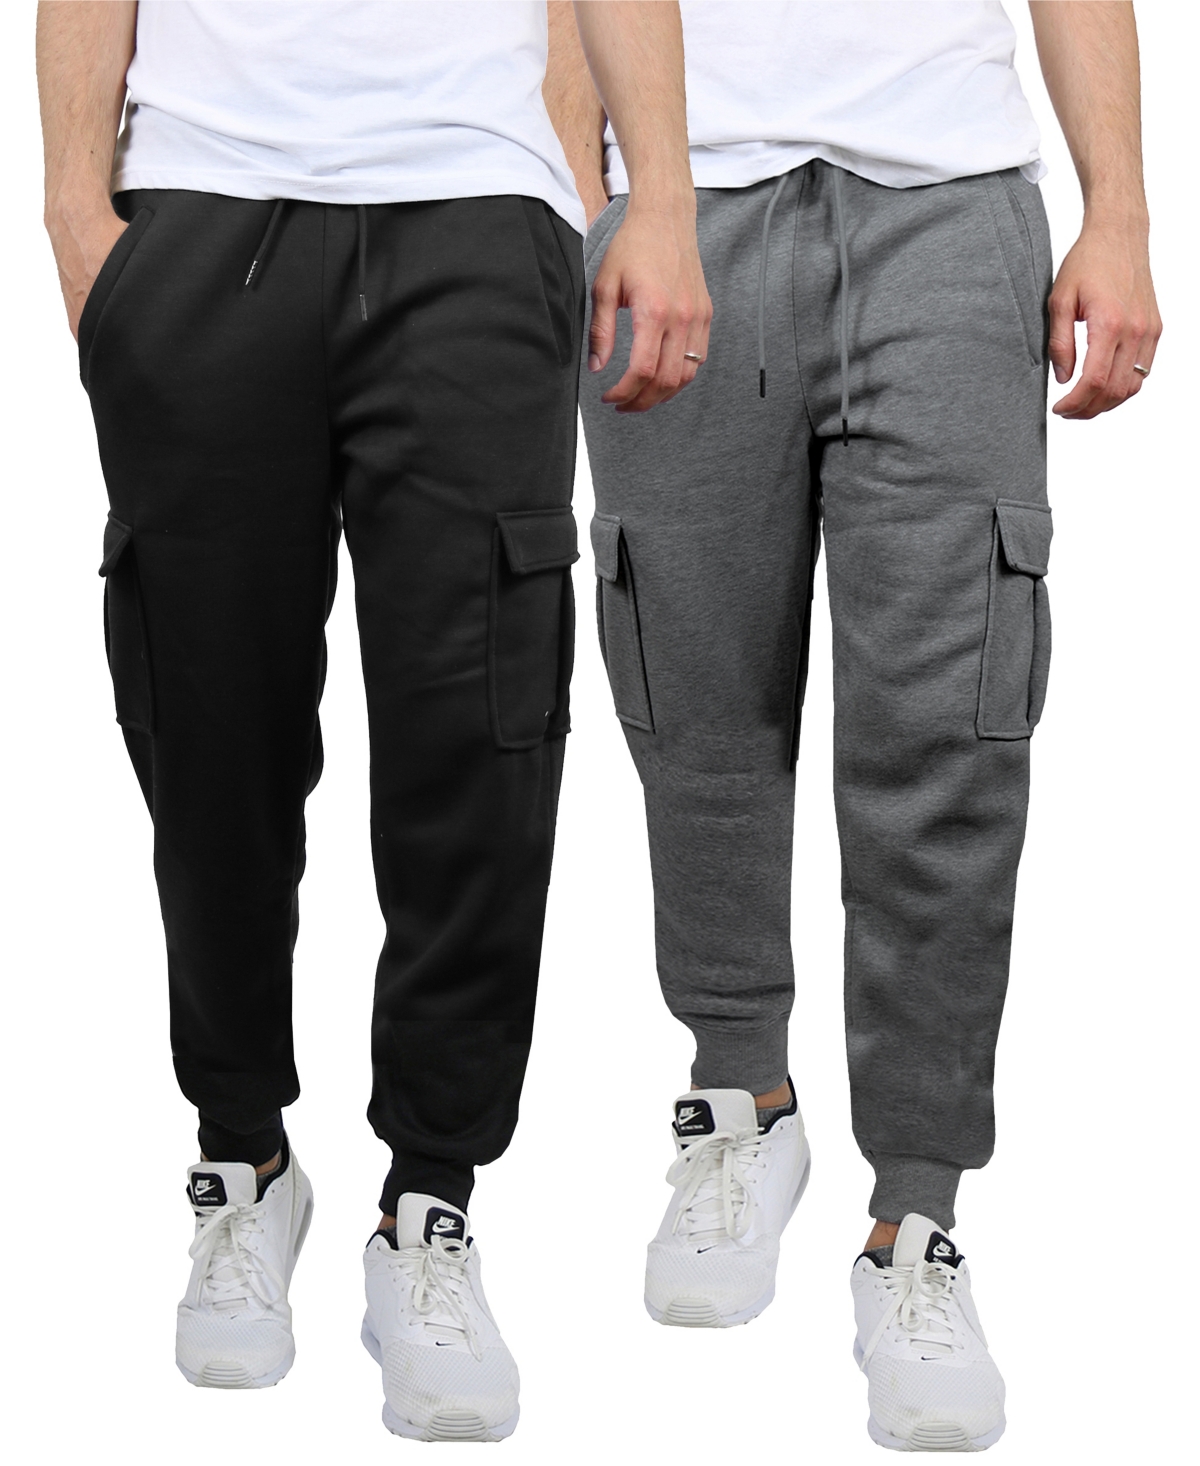 Blue Ice Men's Heavyweight Fleece-lined Cargo Jogger Sweatpants, Pack Of 2 In Black-charcoal